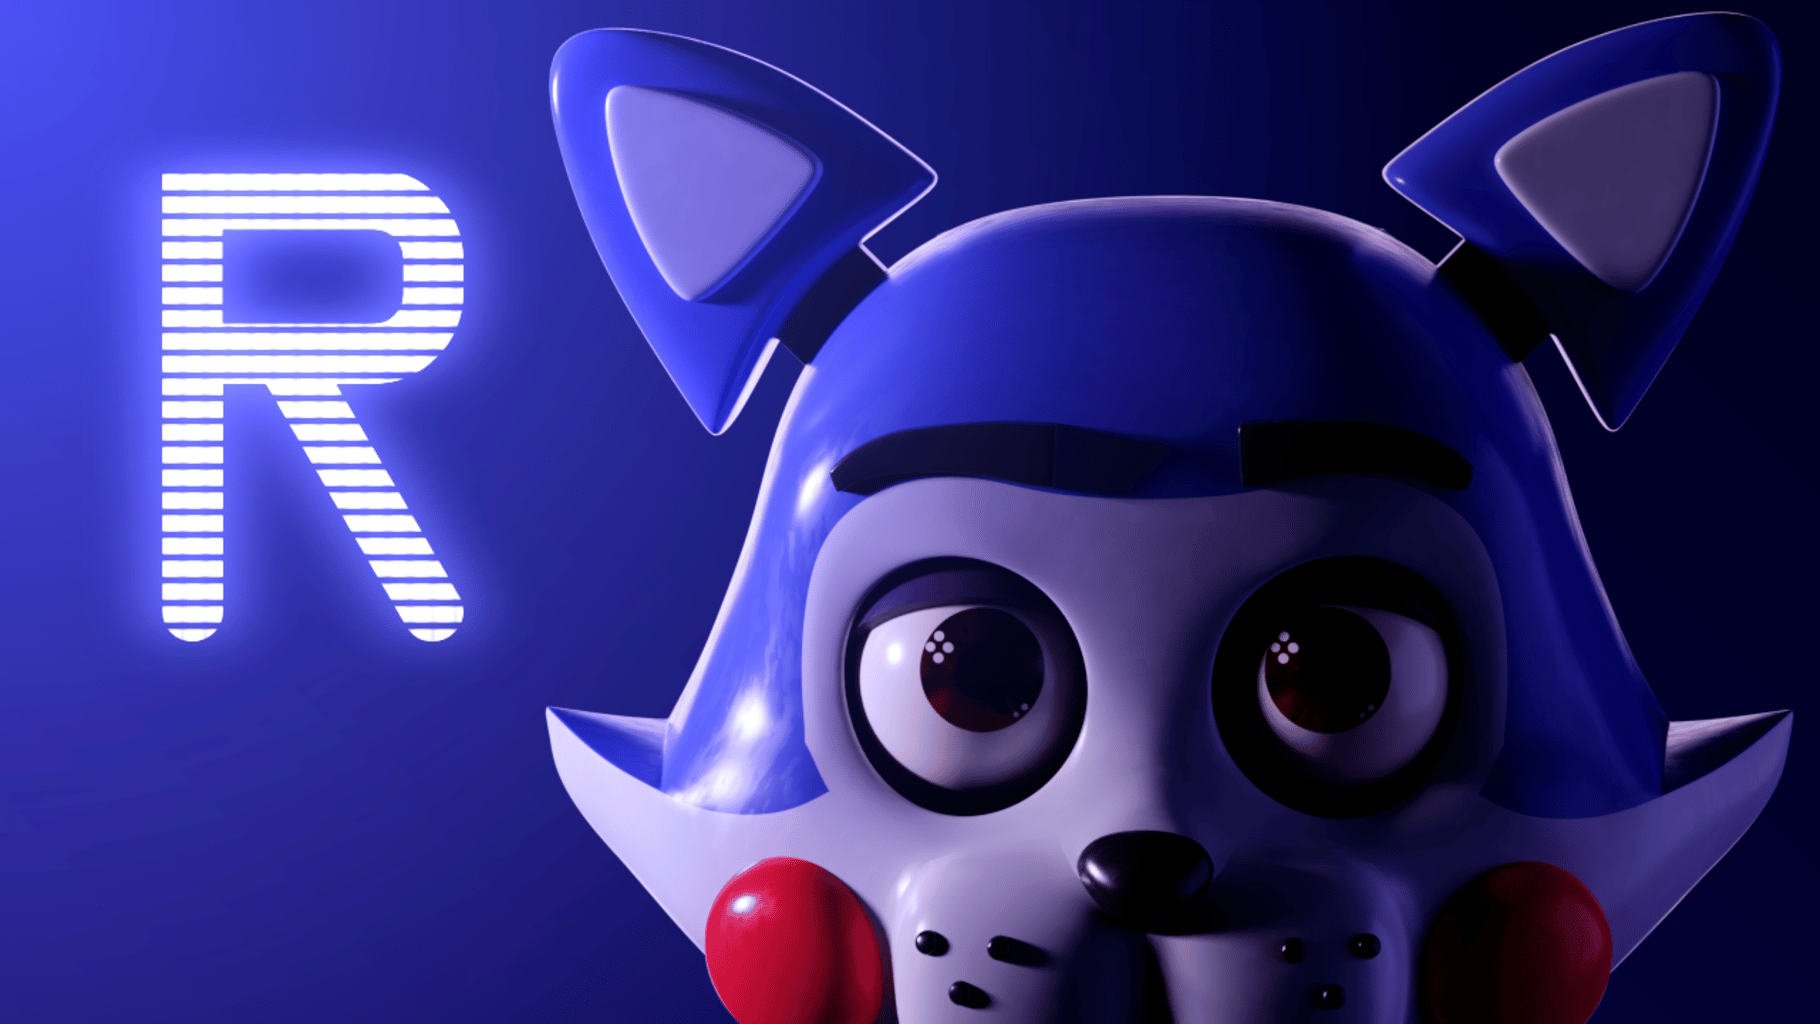 Five Nights in Anime 2 Remastered!! {Night 4} Ft: 